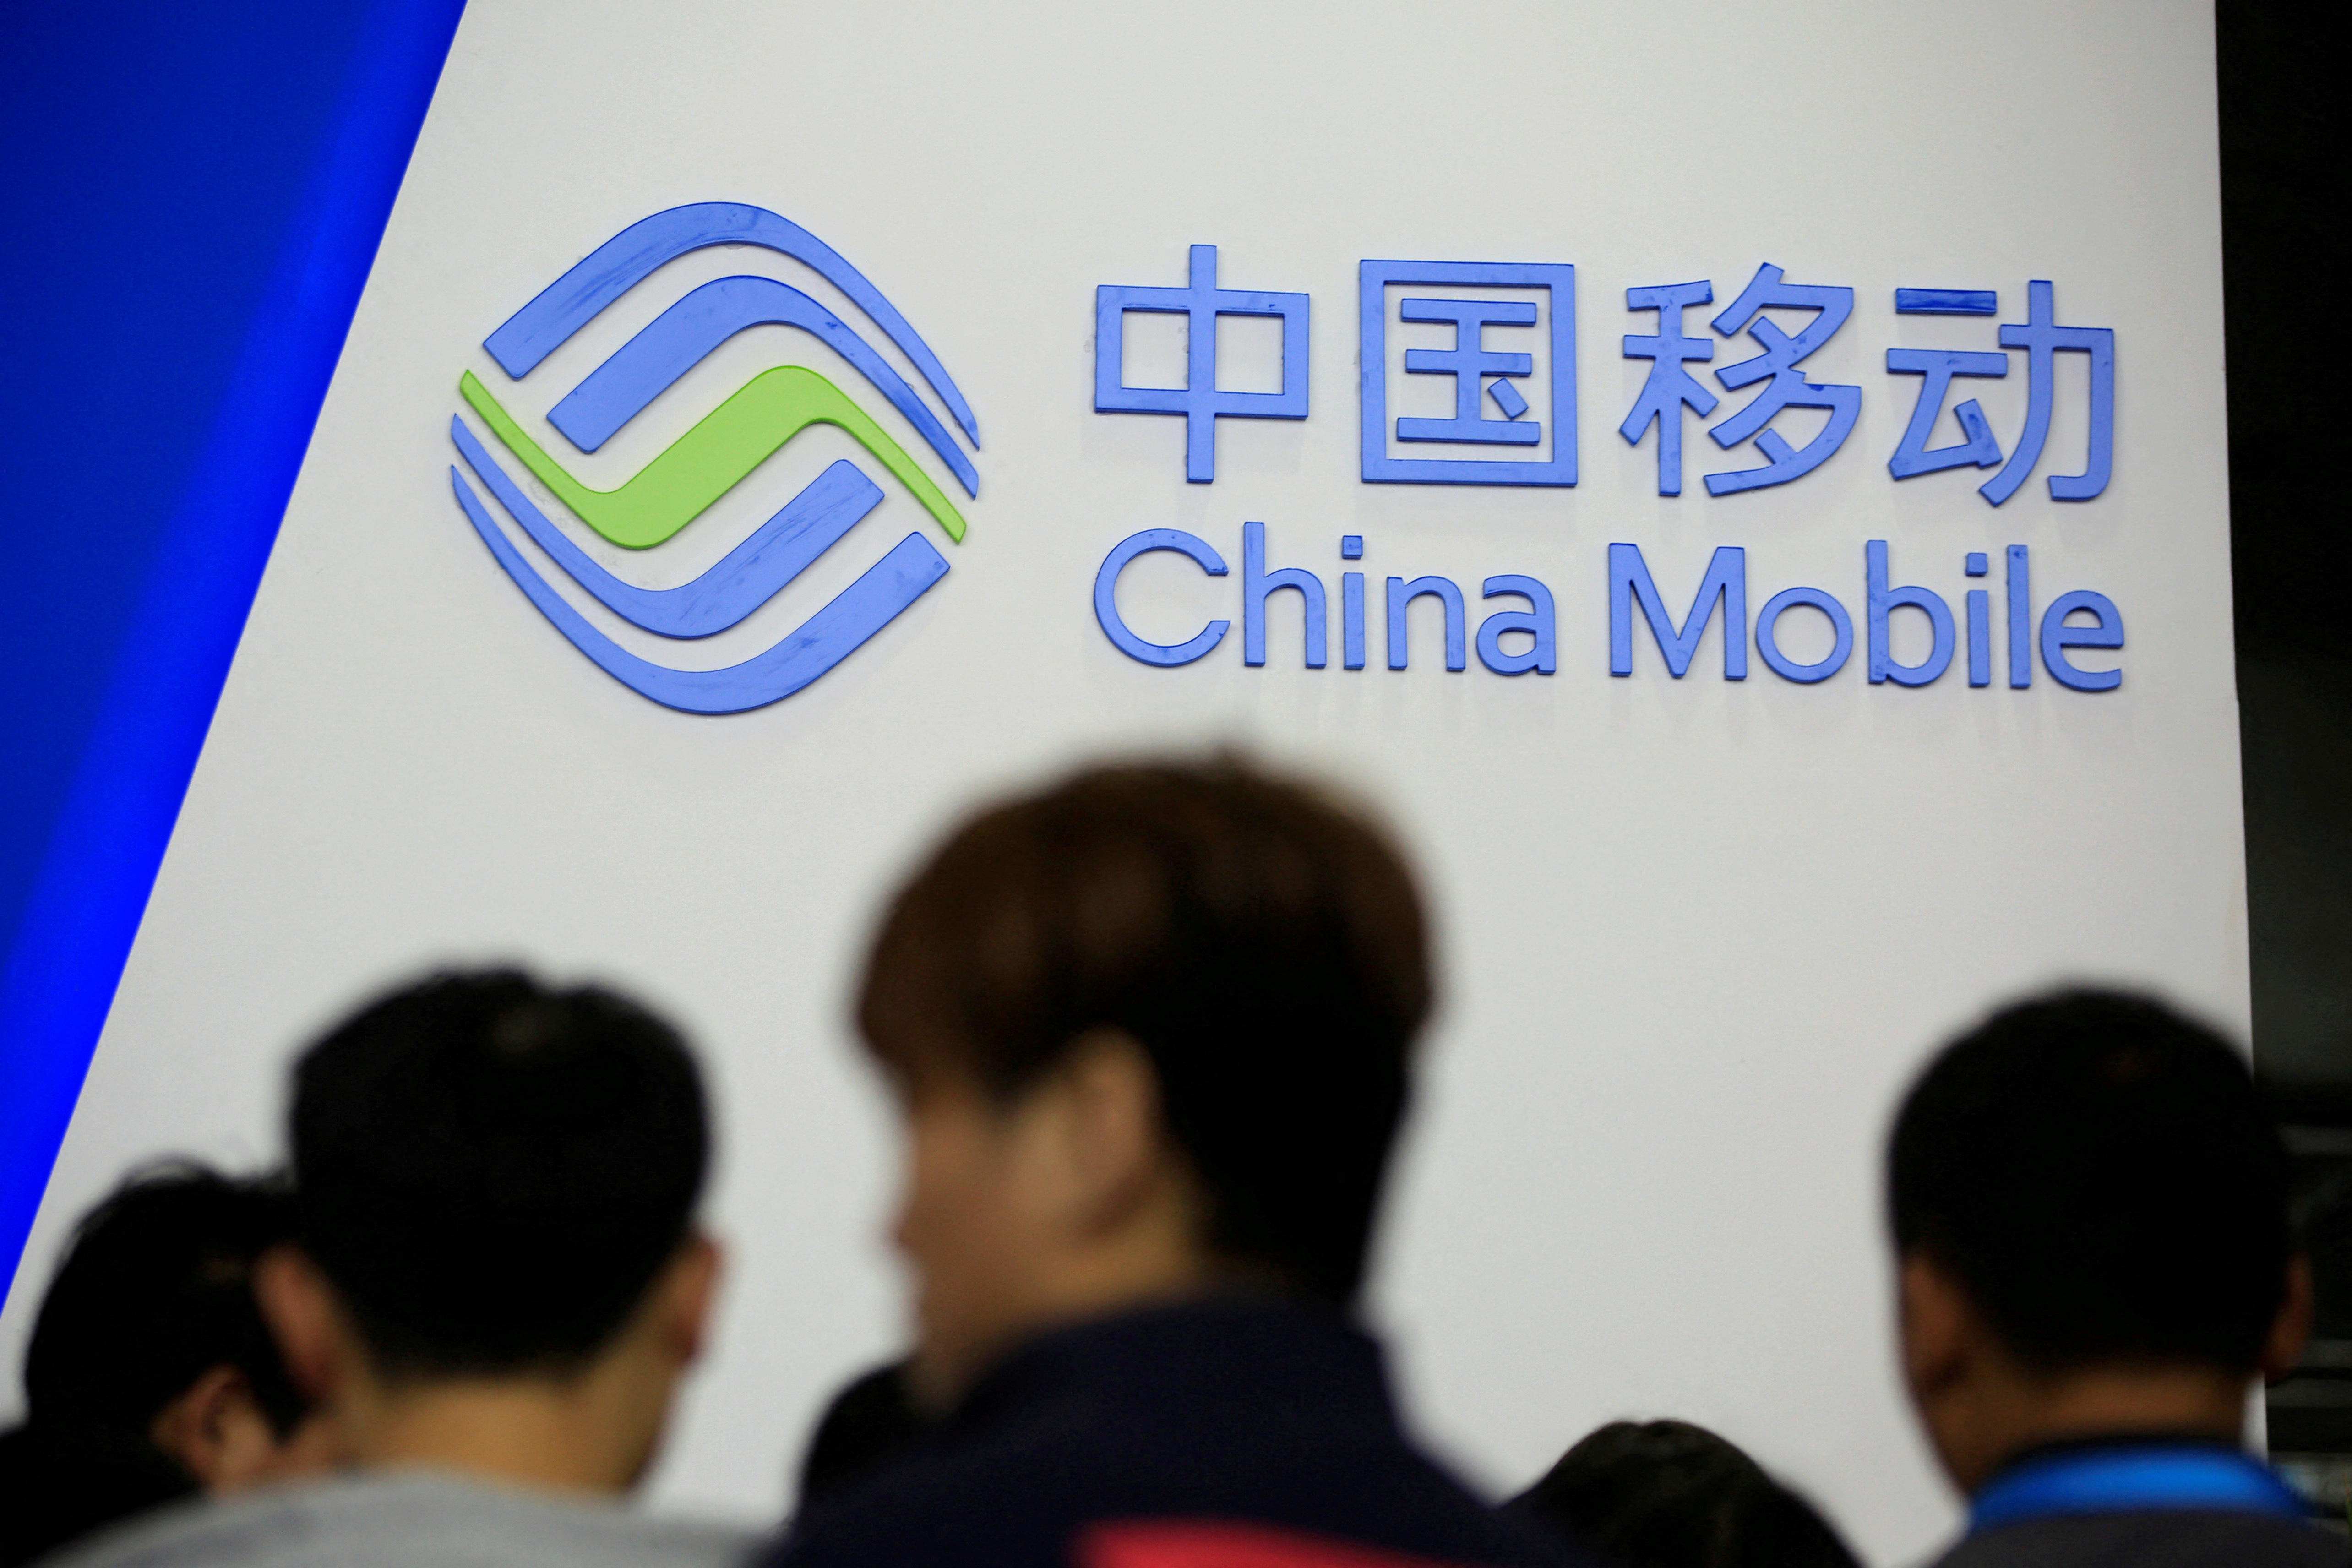 A sign of China Mobile is seen at CES (Consumer Electronics Show) Asia 2016 in Shanghai